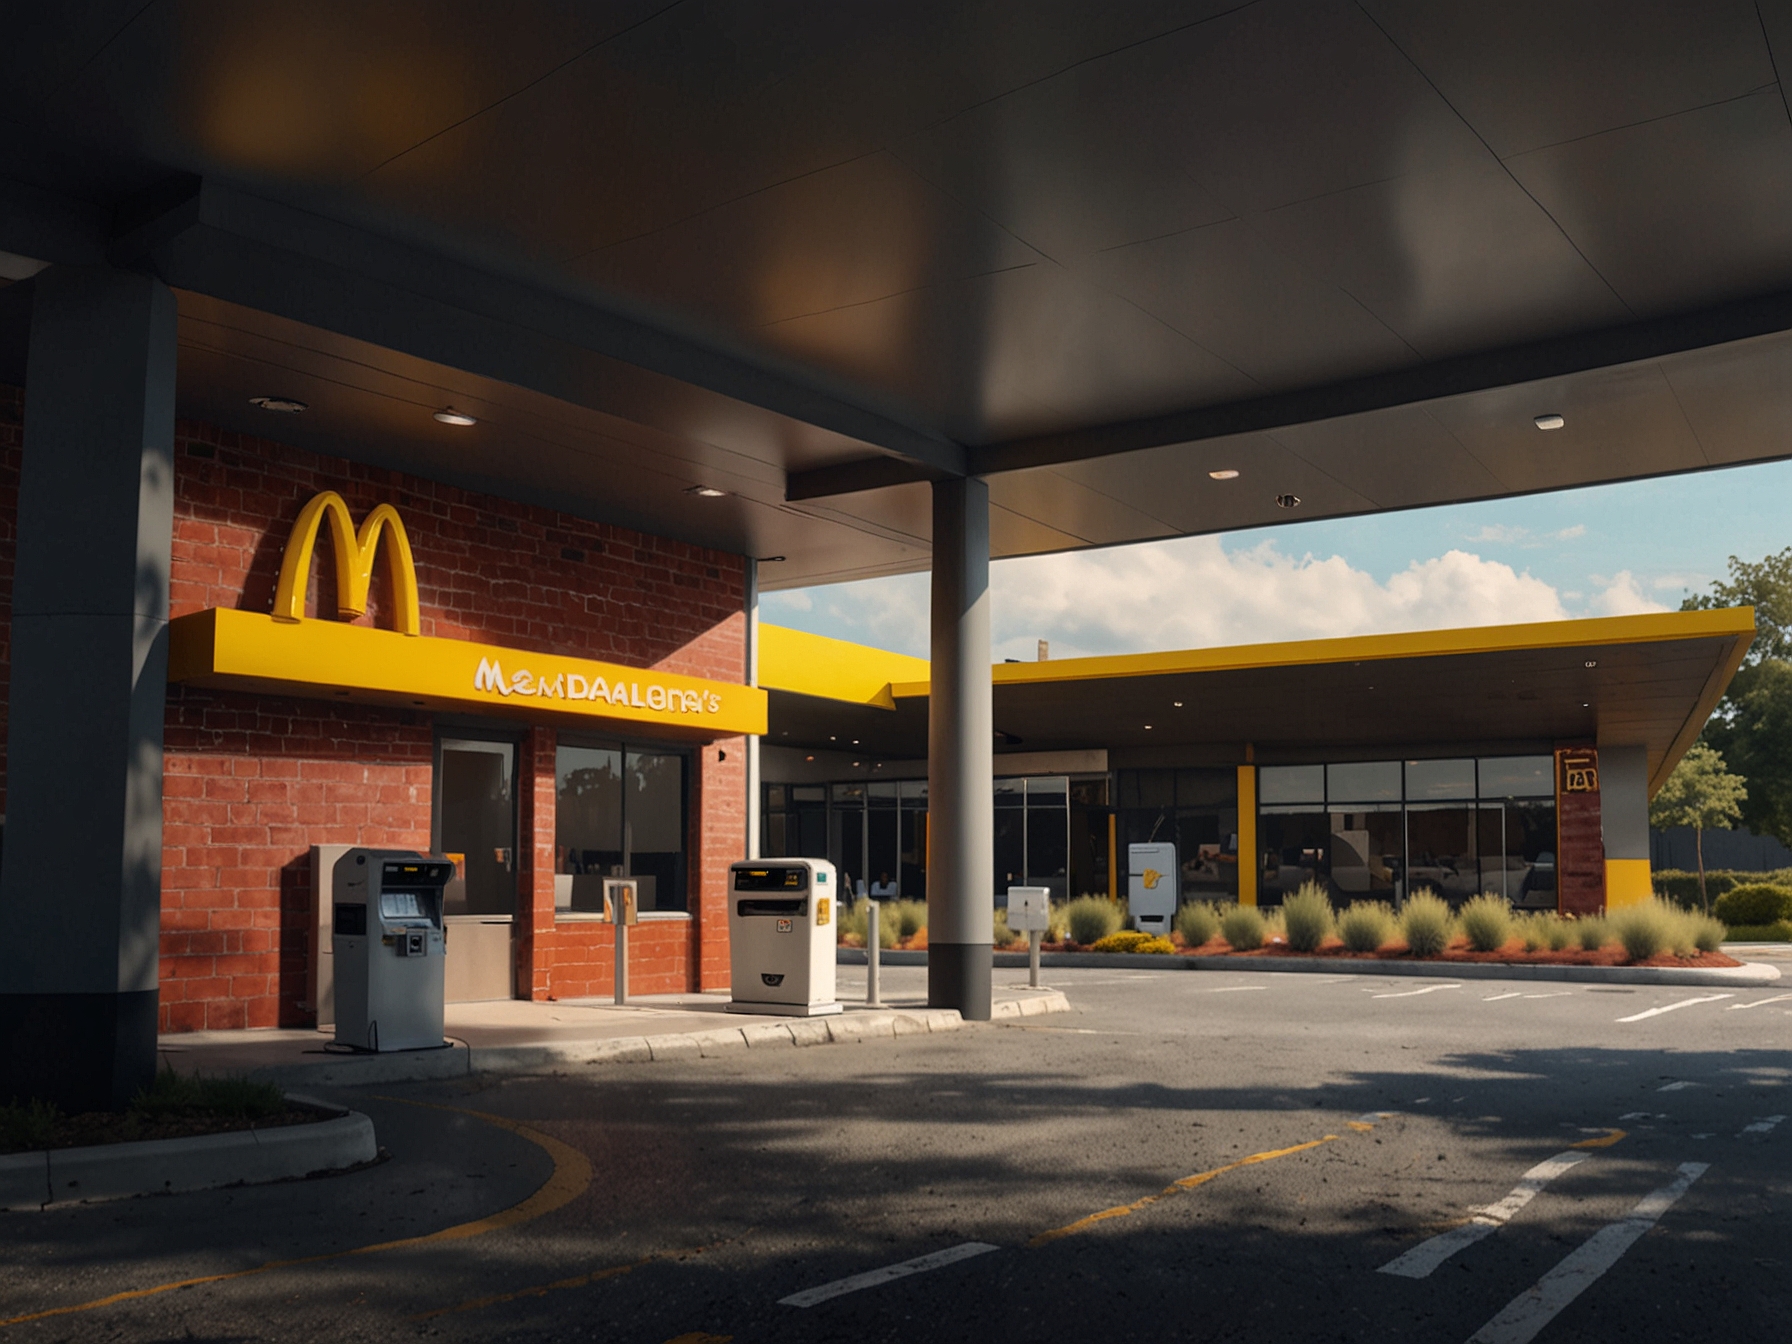 A closer view of the AI drive-thru technology at McDonald's, highlighting the innovative system designed to take orders, reduce wait times, and enhance customer satisfaction.